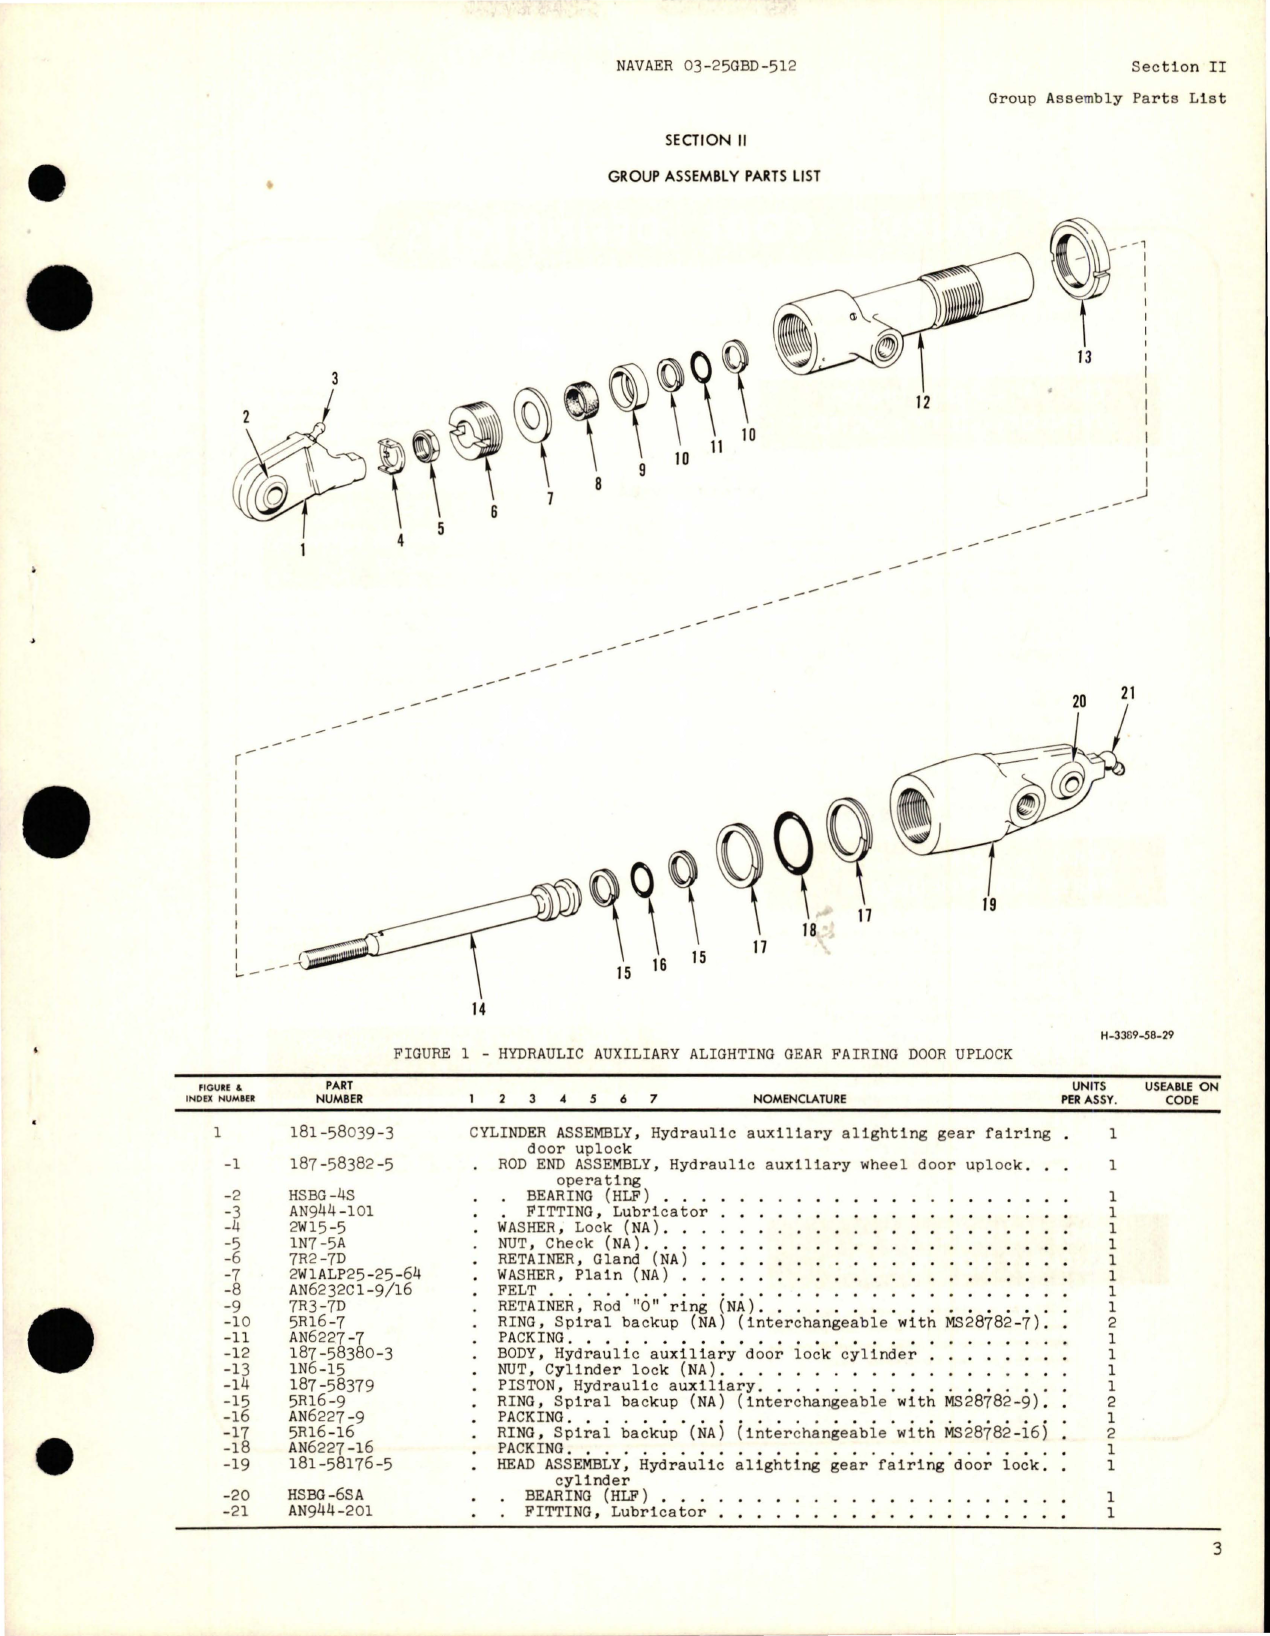 Sample page 5 from AirCorps Library document: Illustrated Parts Breakdown for Hydraulic Auxiliary Alighting Gear Fairing Door Uplock Cylinder Assembly - Part 181-58039-3 